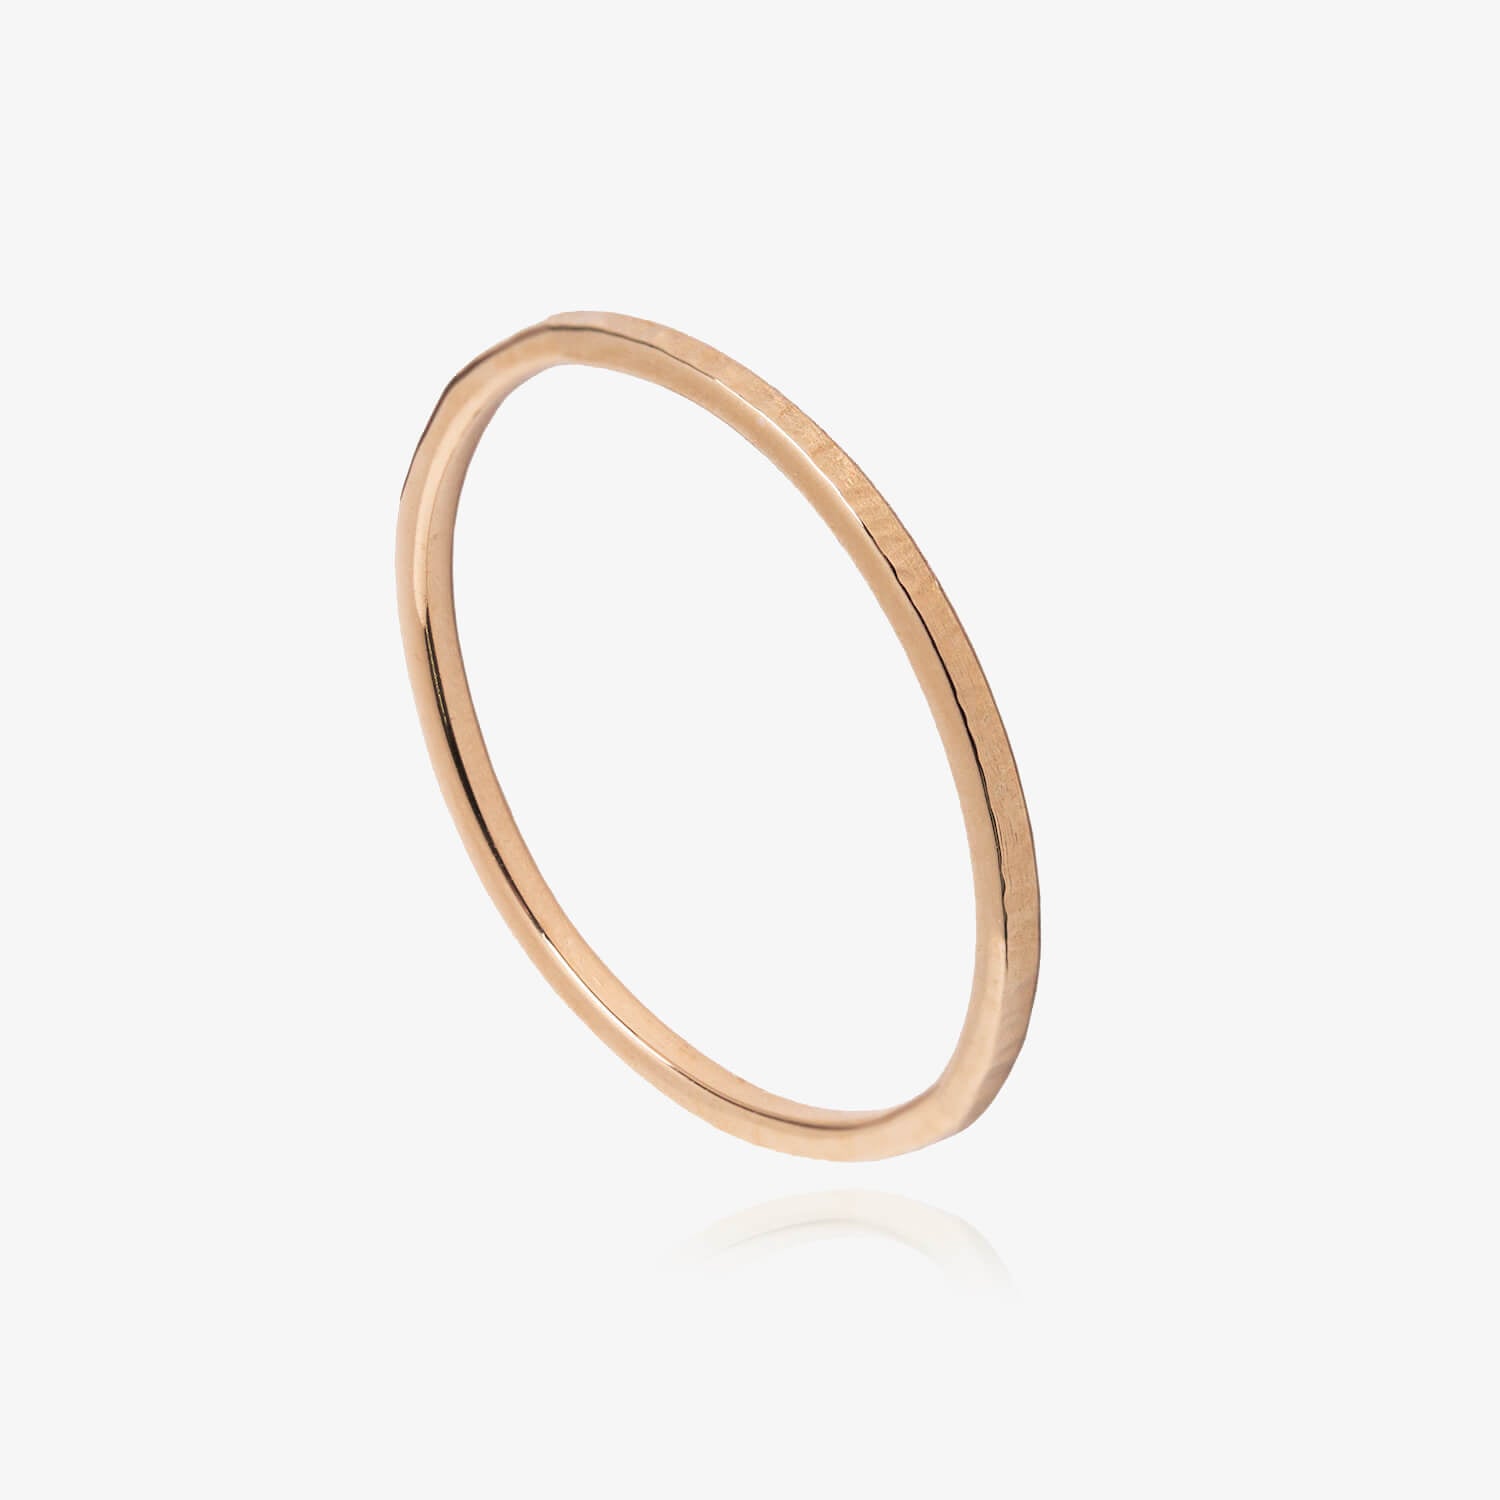 Rose gold textured ring on a white background